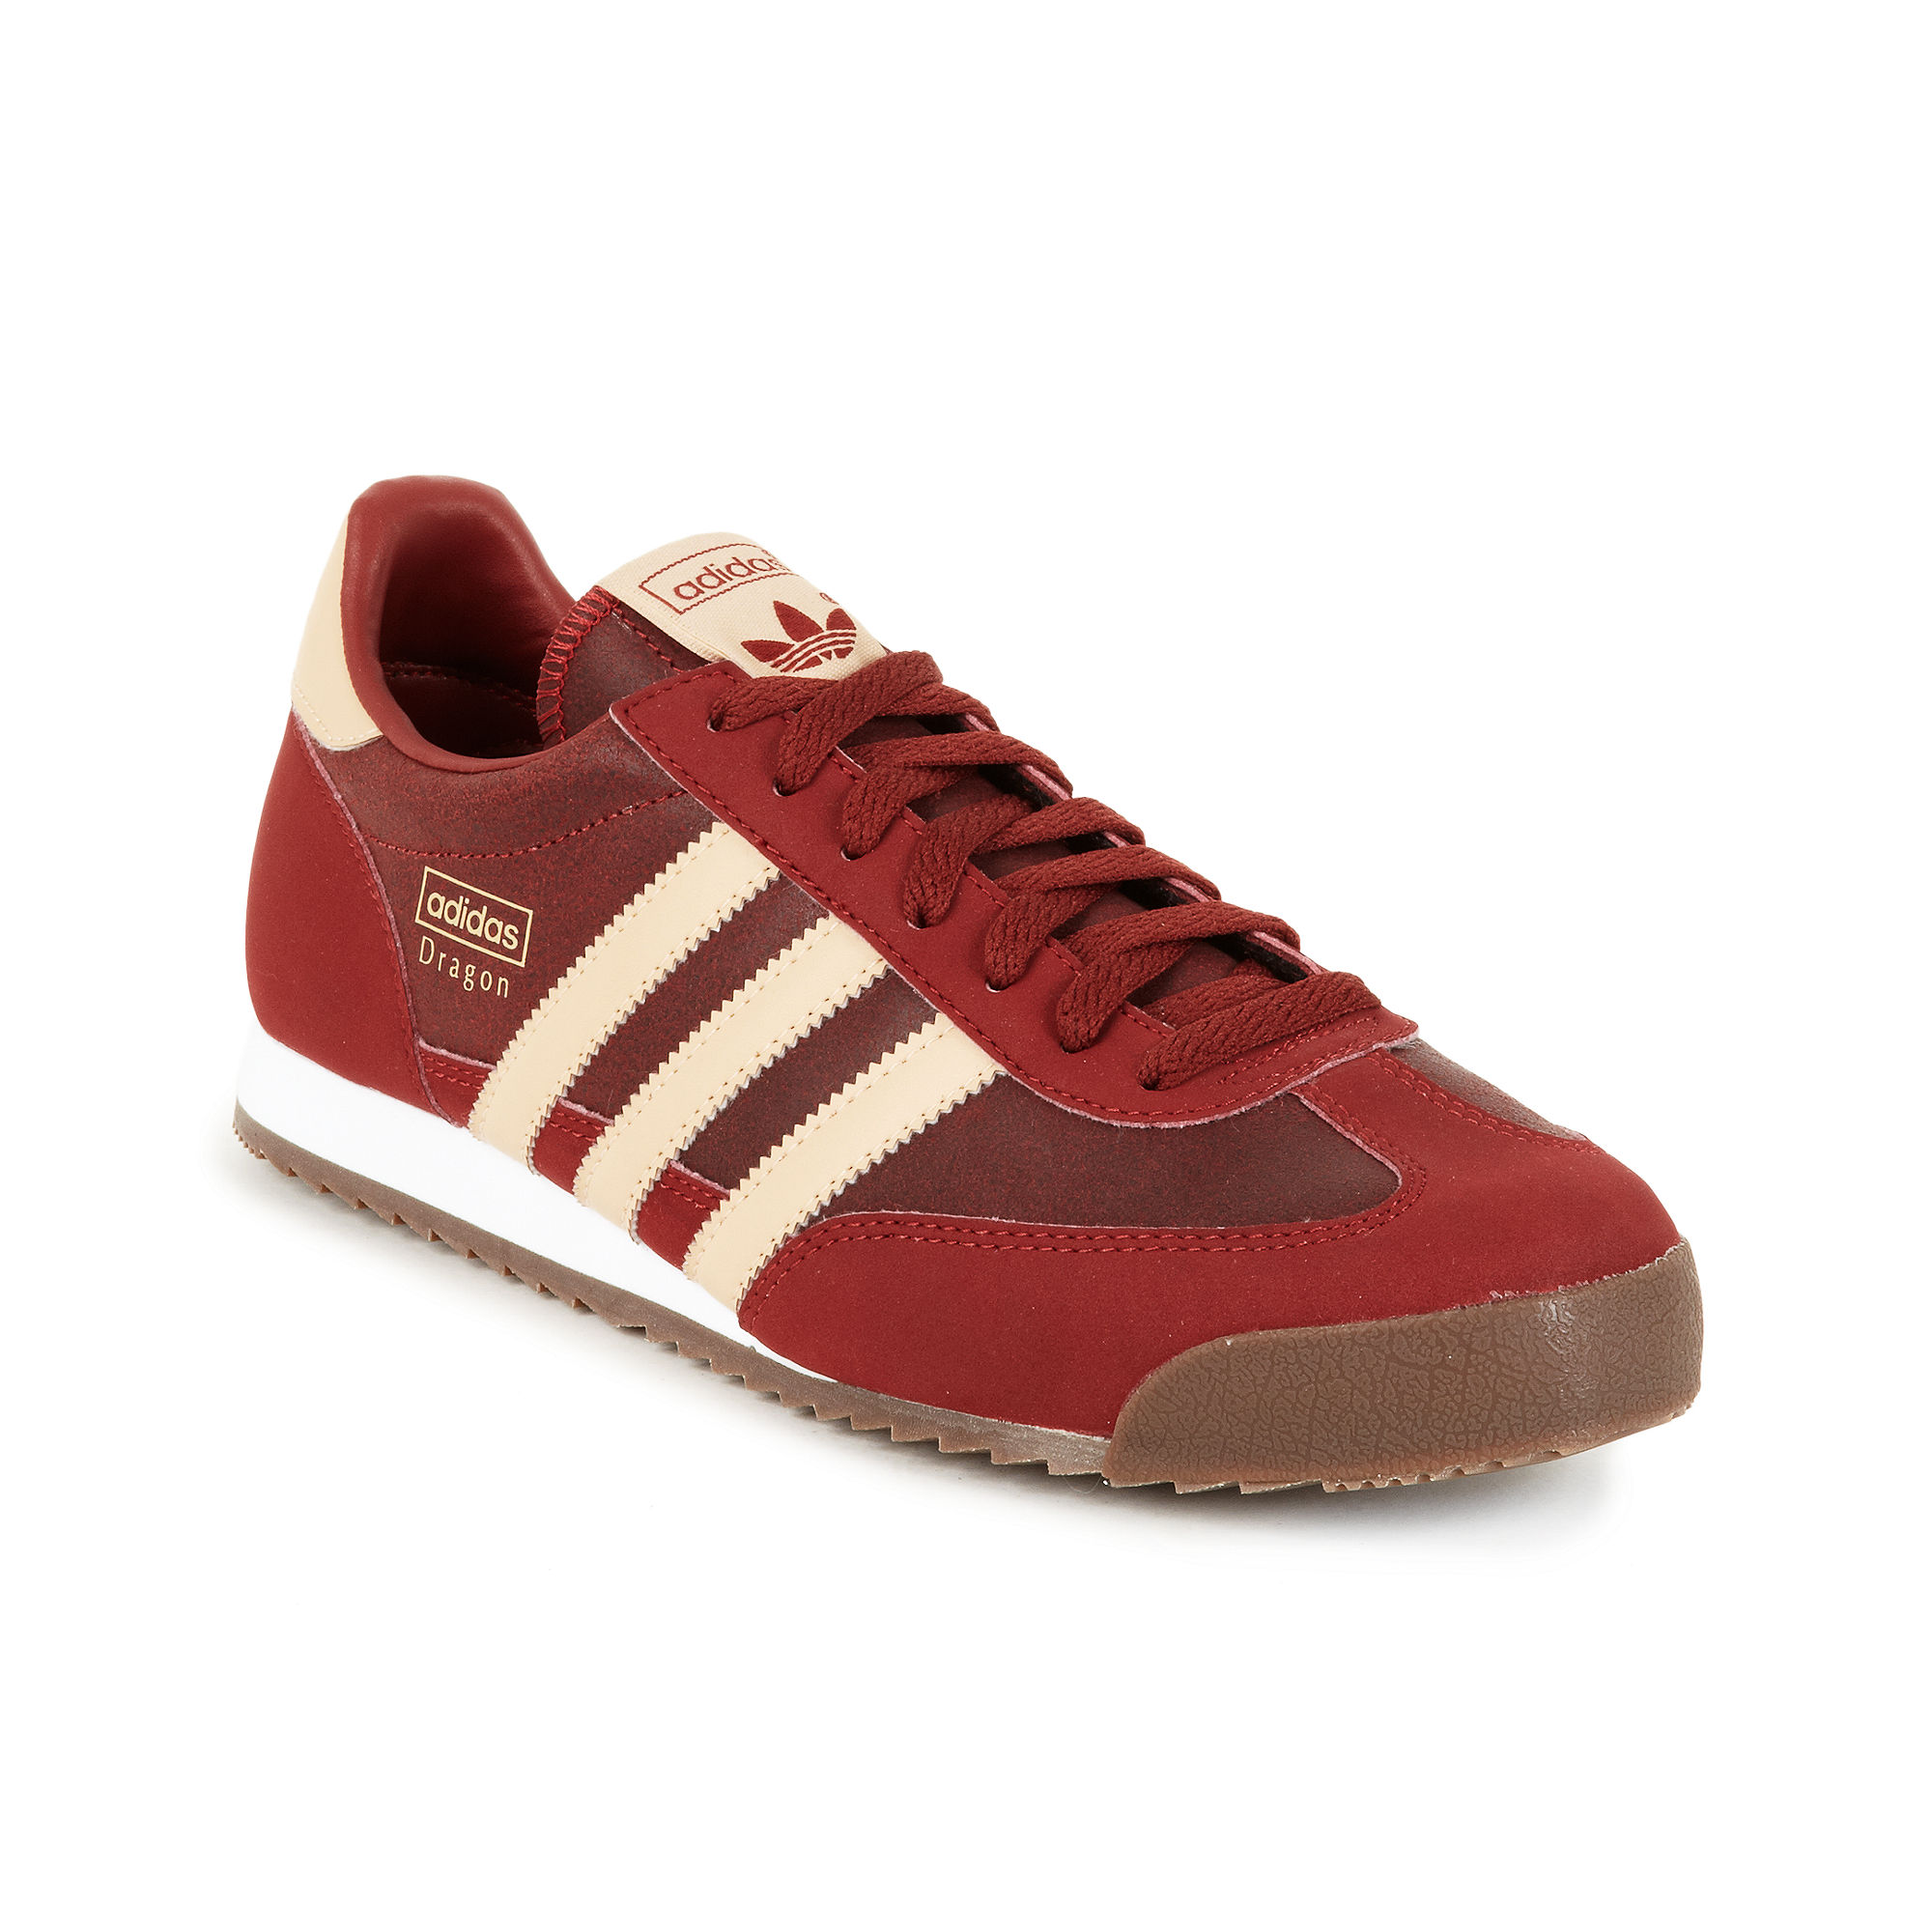 adidas Adidas Originals Dragon Sneakers in Red for Men - Lyst